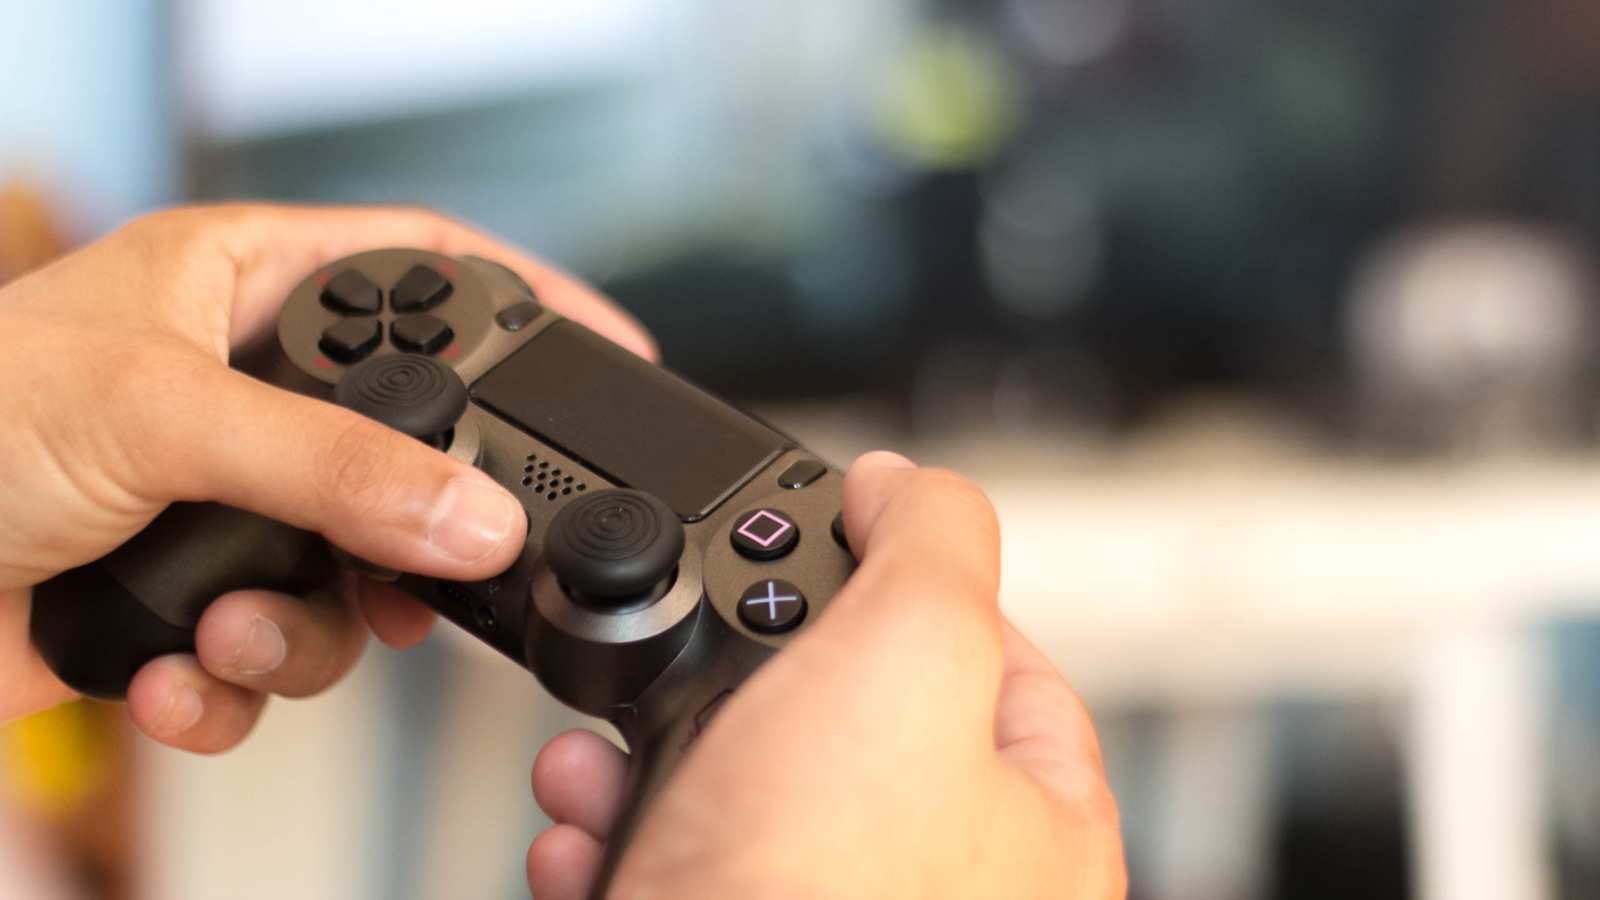 G-Commerce is the New Ecommerce: 5 Ways Brands Drive Revenue Through Gaming